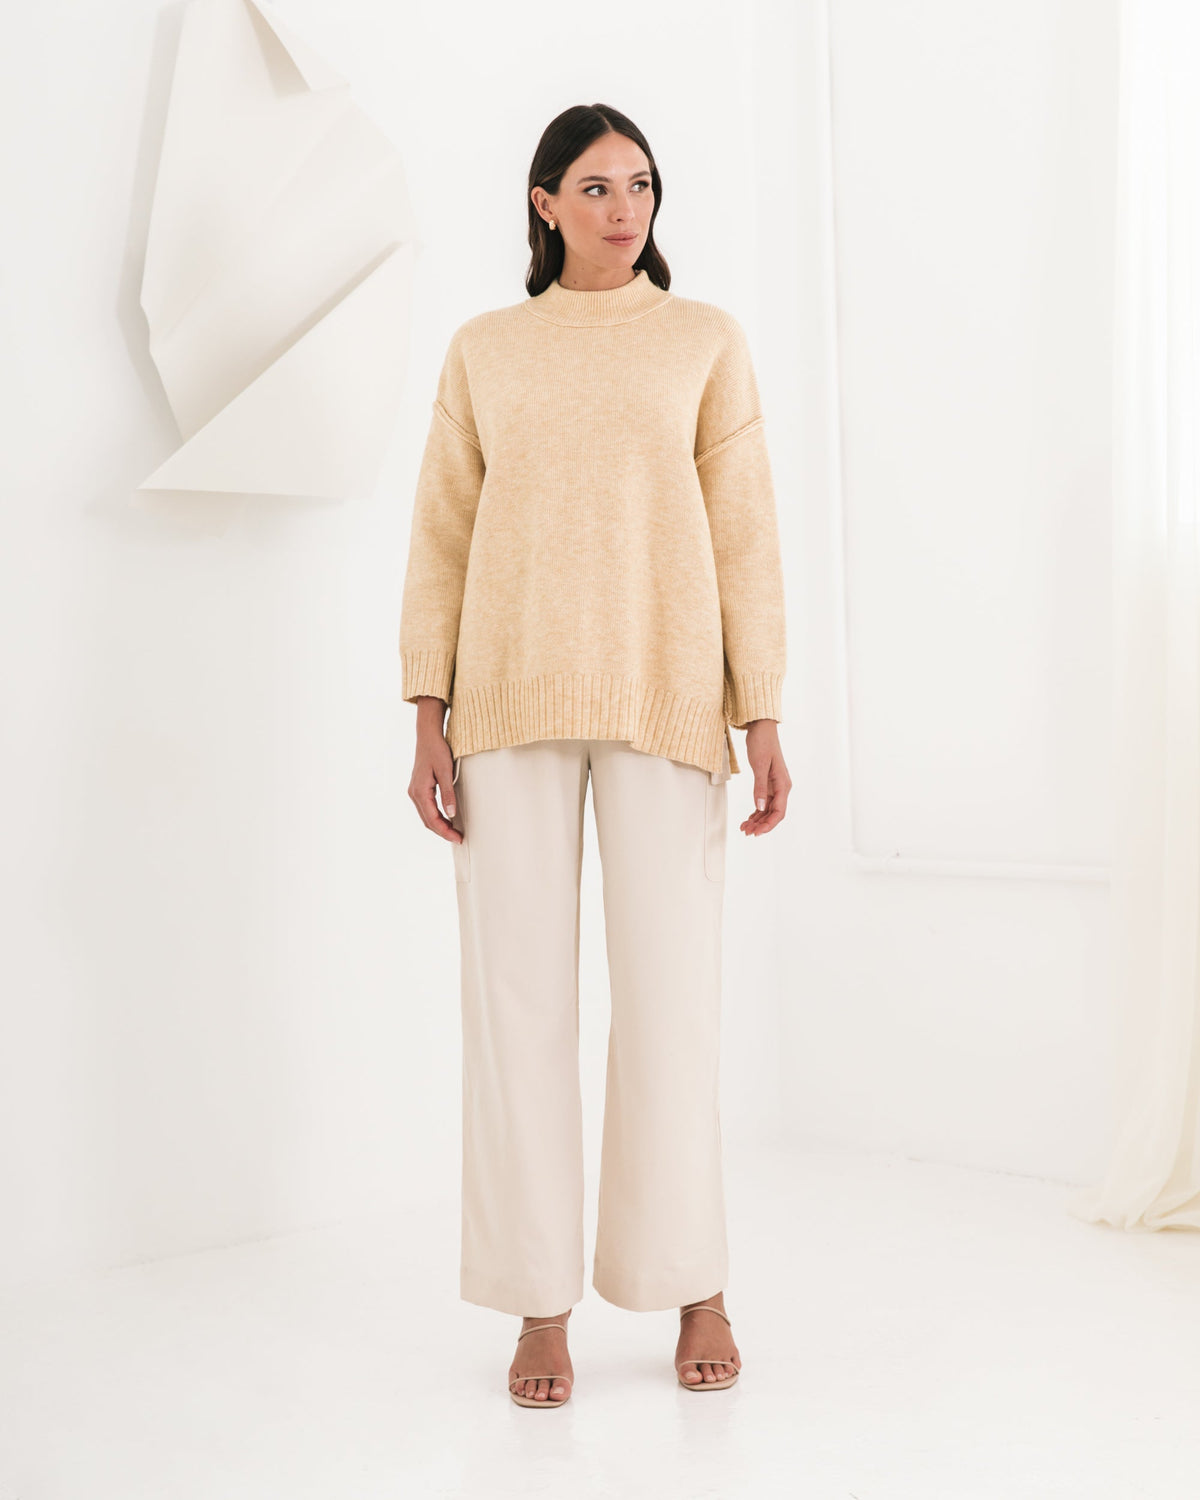 OATMEAL OVERSIZED FRONT SEAM KNIT JUMPER